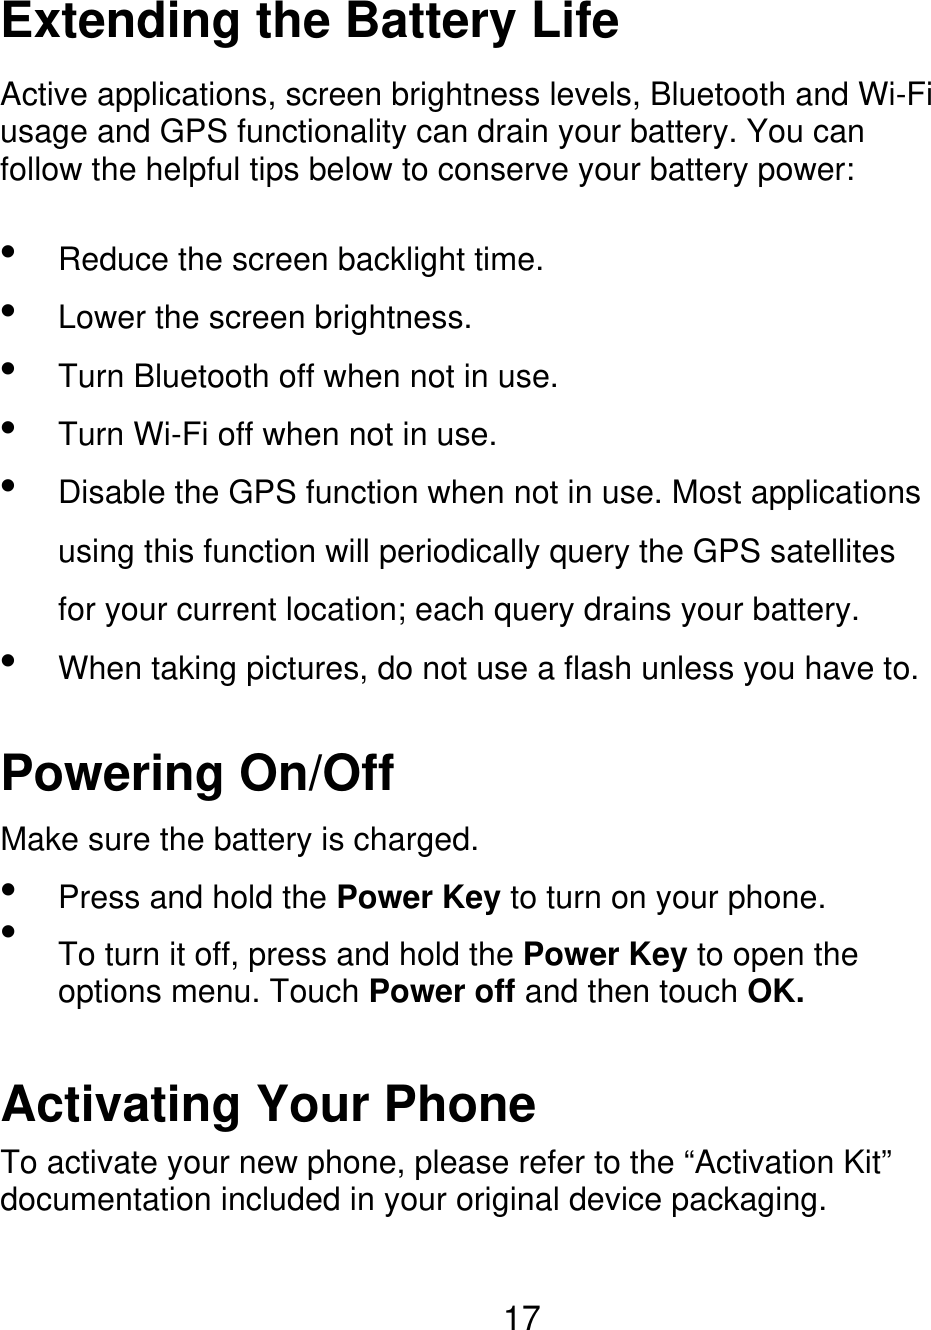 Extending the Battery Life Active applications, screen brightness levels, Bluetooth and Wi-Fi usage and GPS functionality can drain your battery. You can follow the helpful tips below to conserve your battery power:      Reduce the screen backlight time. Lower the screen brightness. Turn Bluetooth off when not in use. Turn Wi-Fi off when not in use. Disable the GPS function when not in use. Most applications using this function will periodically query the GPS satellites for your current location; each query drains your battery.  When taking pictures, do not use a flash unless you have to. Powering On/Off Make sure the battery is charged.   Press and hold the Power Key to turn on your phone. To turn it off, press and hold the Power Key to open the options menu. Touch Power off and then touch OK. Activating Your Phone To activate your new phone, please refer to the “Activation Kit” documentation included in your original device packaging. 17 